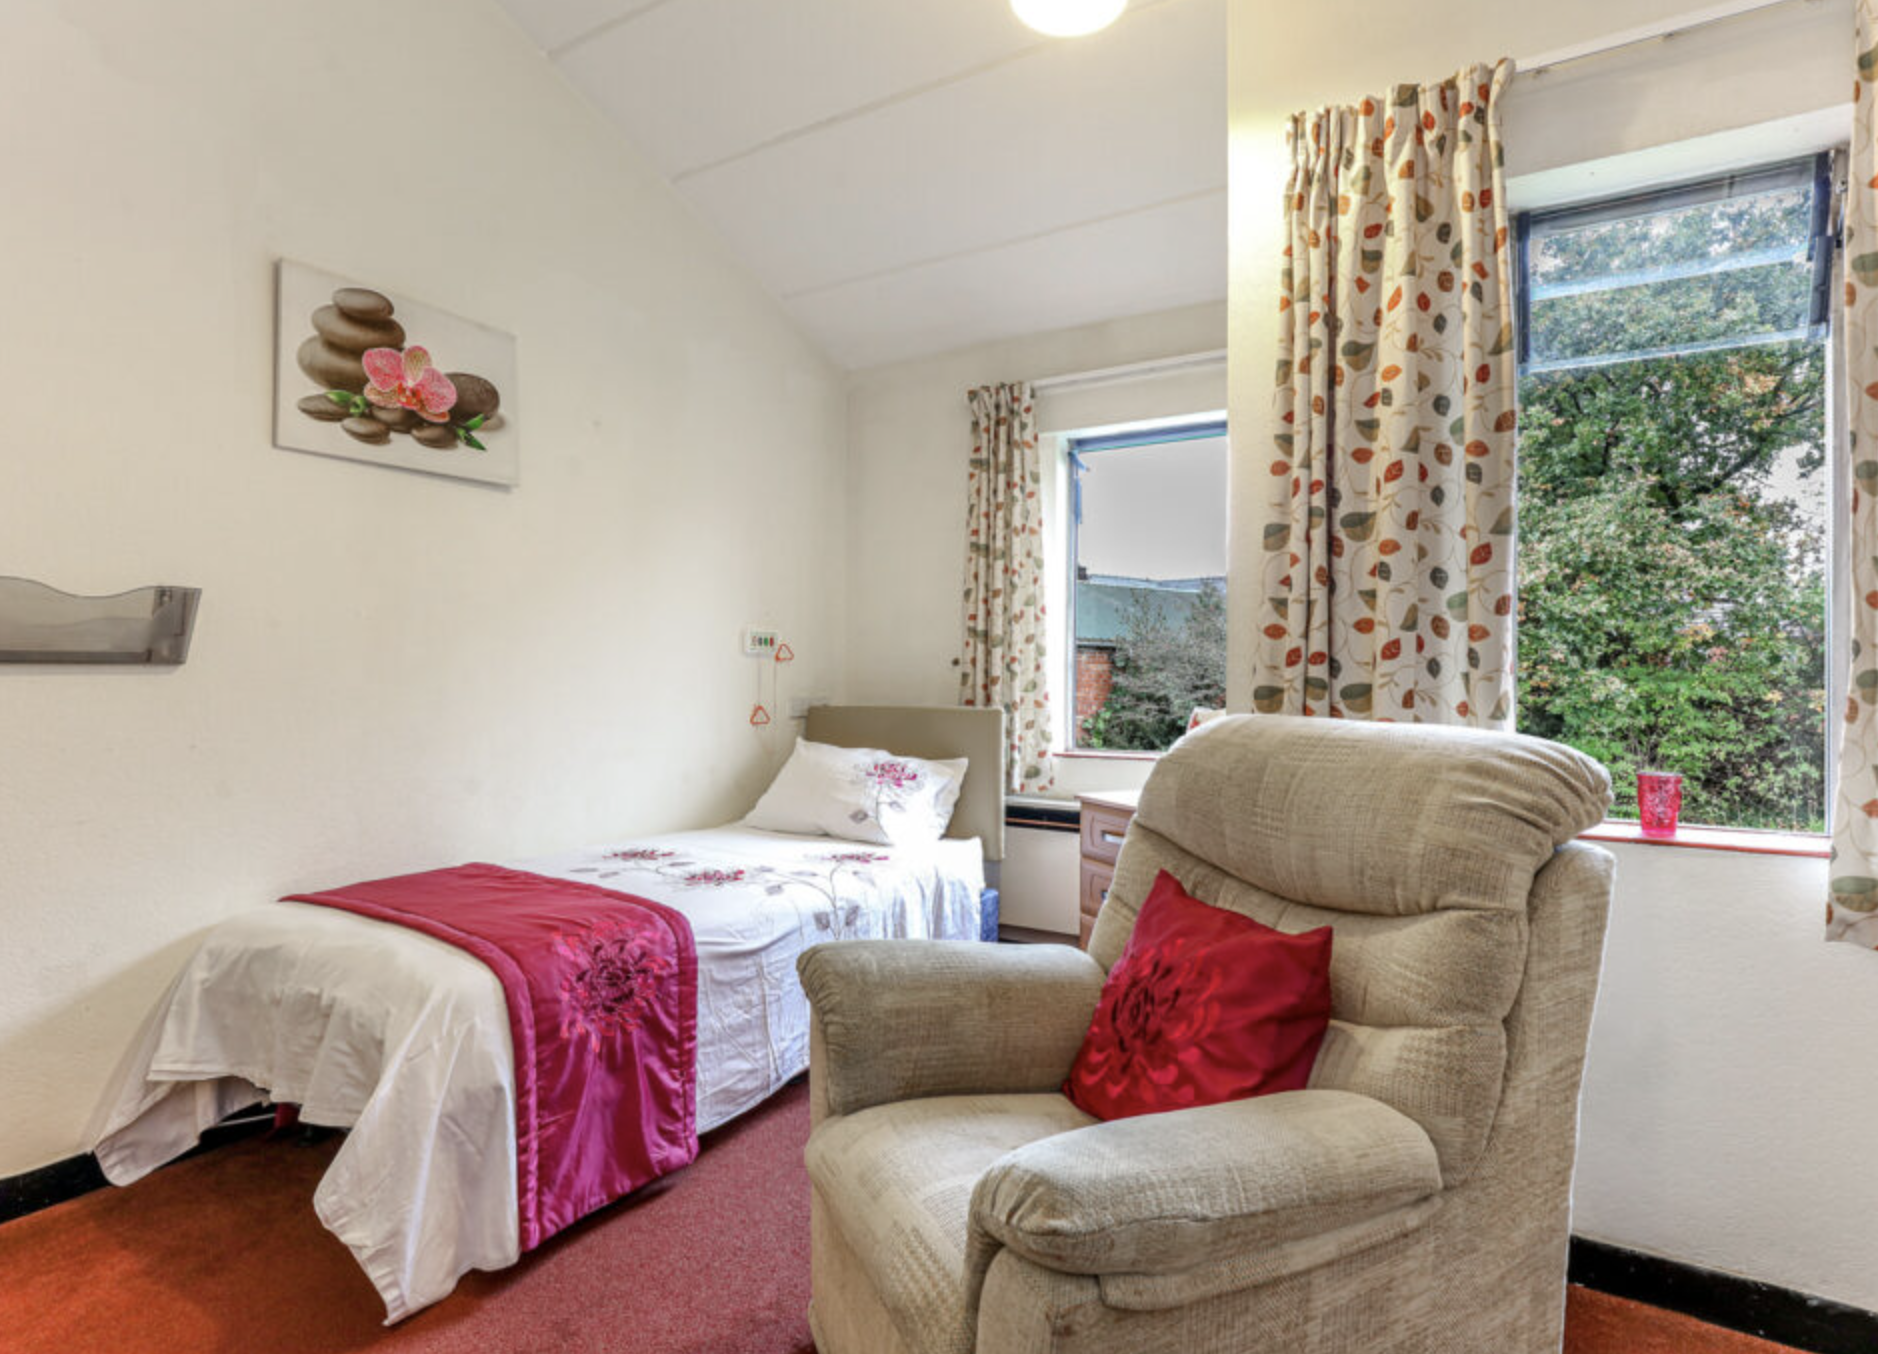 Bedroom of Crossways care home in Northwich, Cheshire